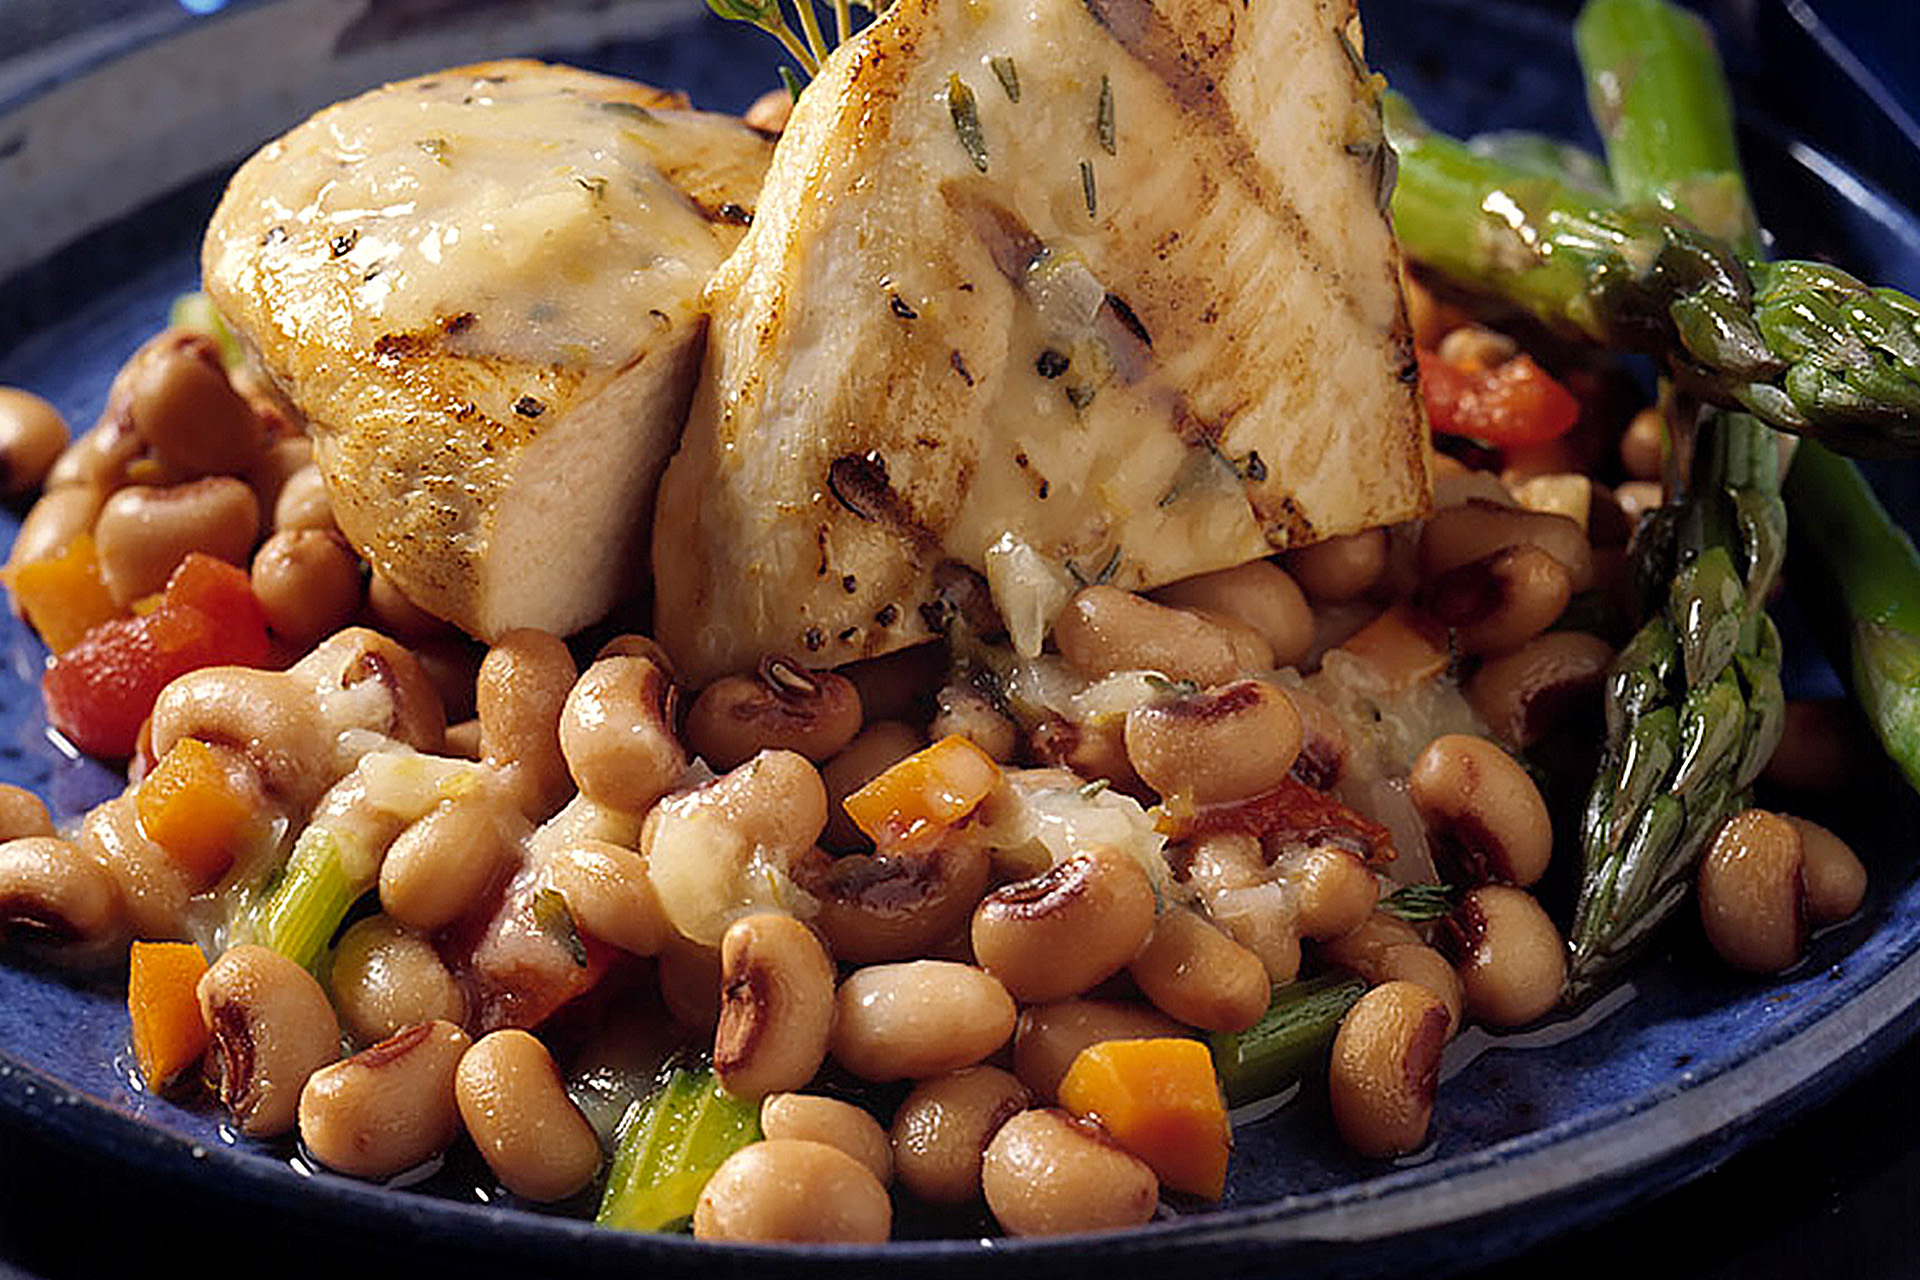 Grilled chicken breast served on a bed of blackeye peas and Navy beans